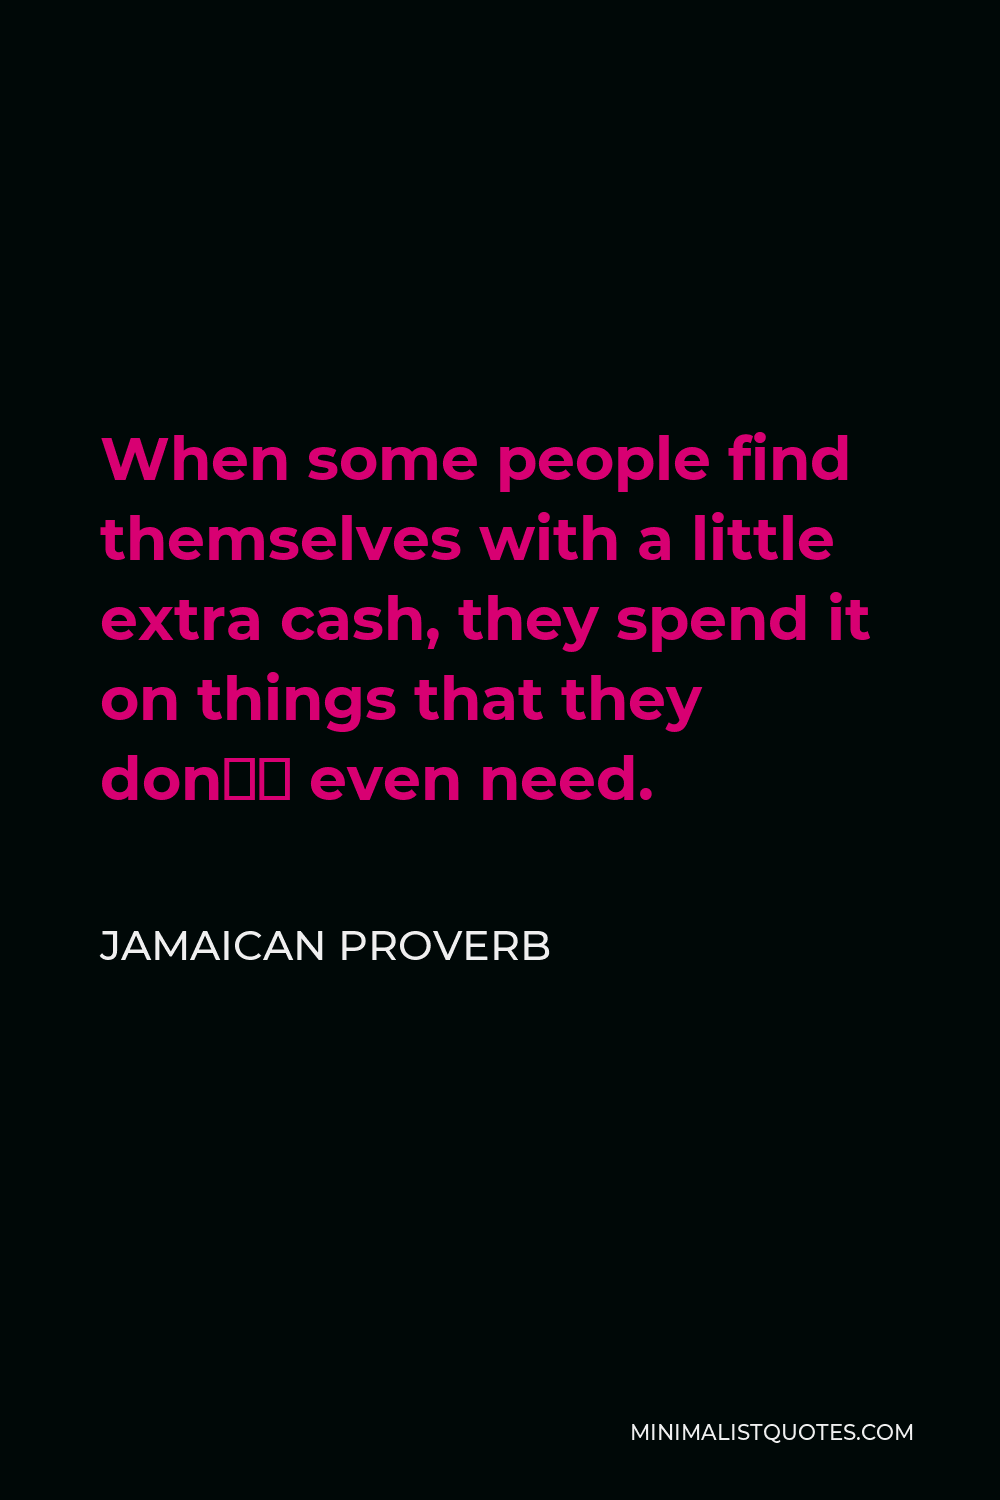 Jamaican Proverb Quote - When some people find themselves with a little extra cash, they spend it on things that they don’t even need.